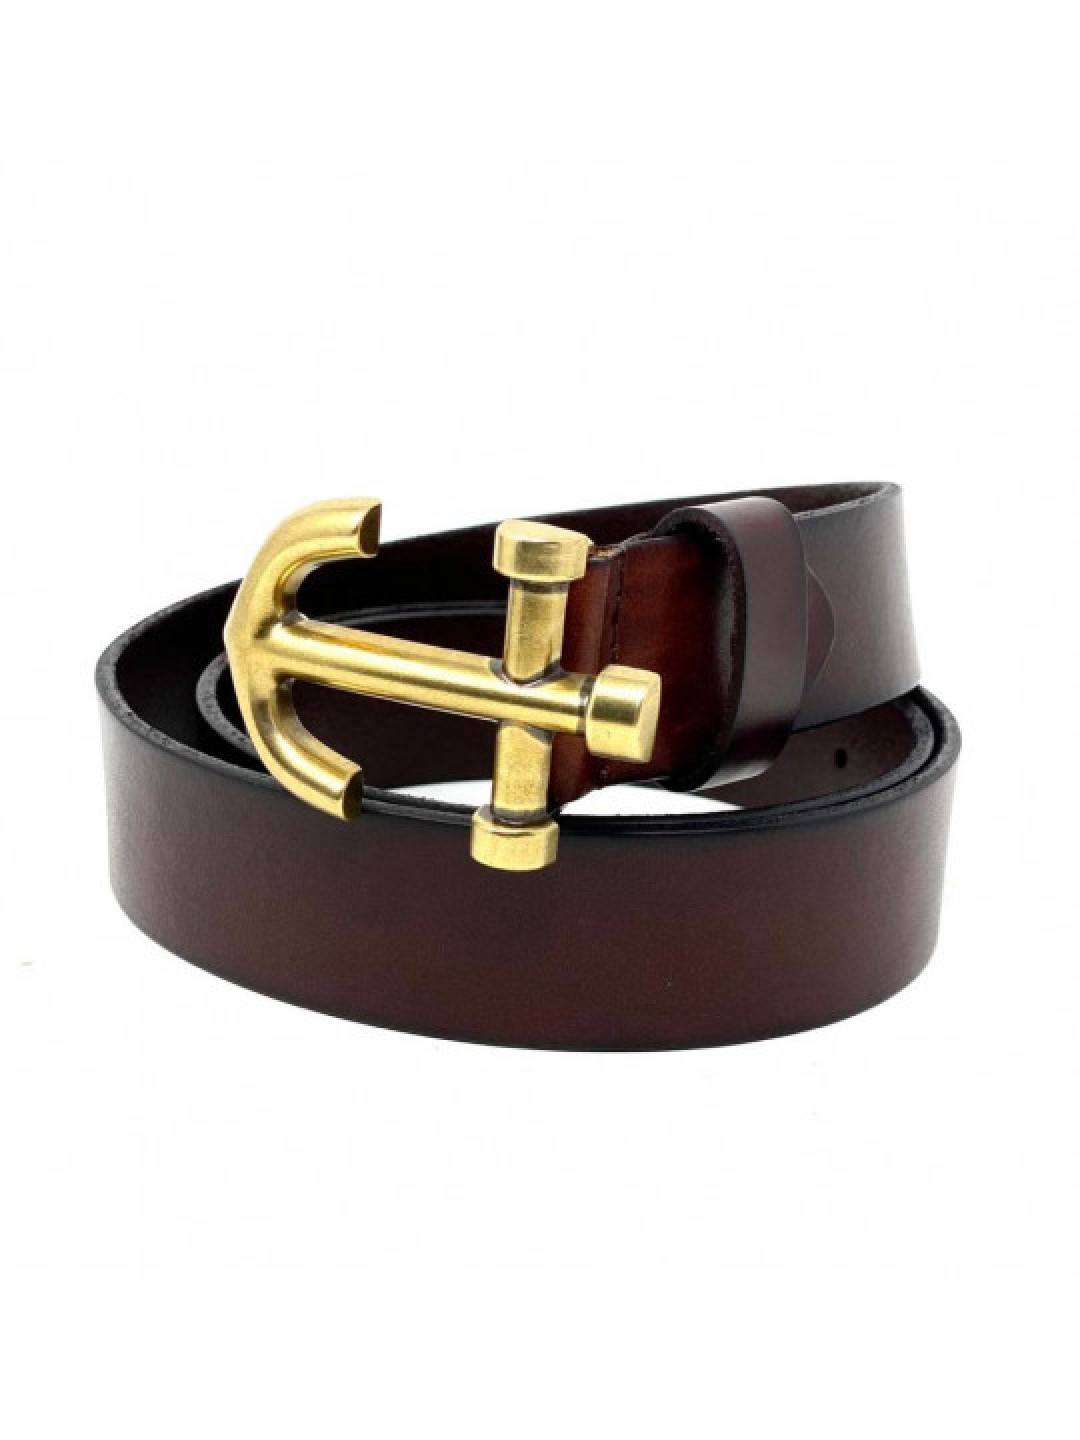 Find Latest New Tory Leather Anchor Belt for men Wholesale or Retail, by  H&M in Lagos Nigeria